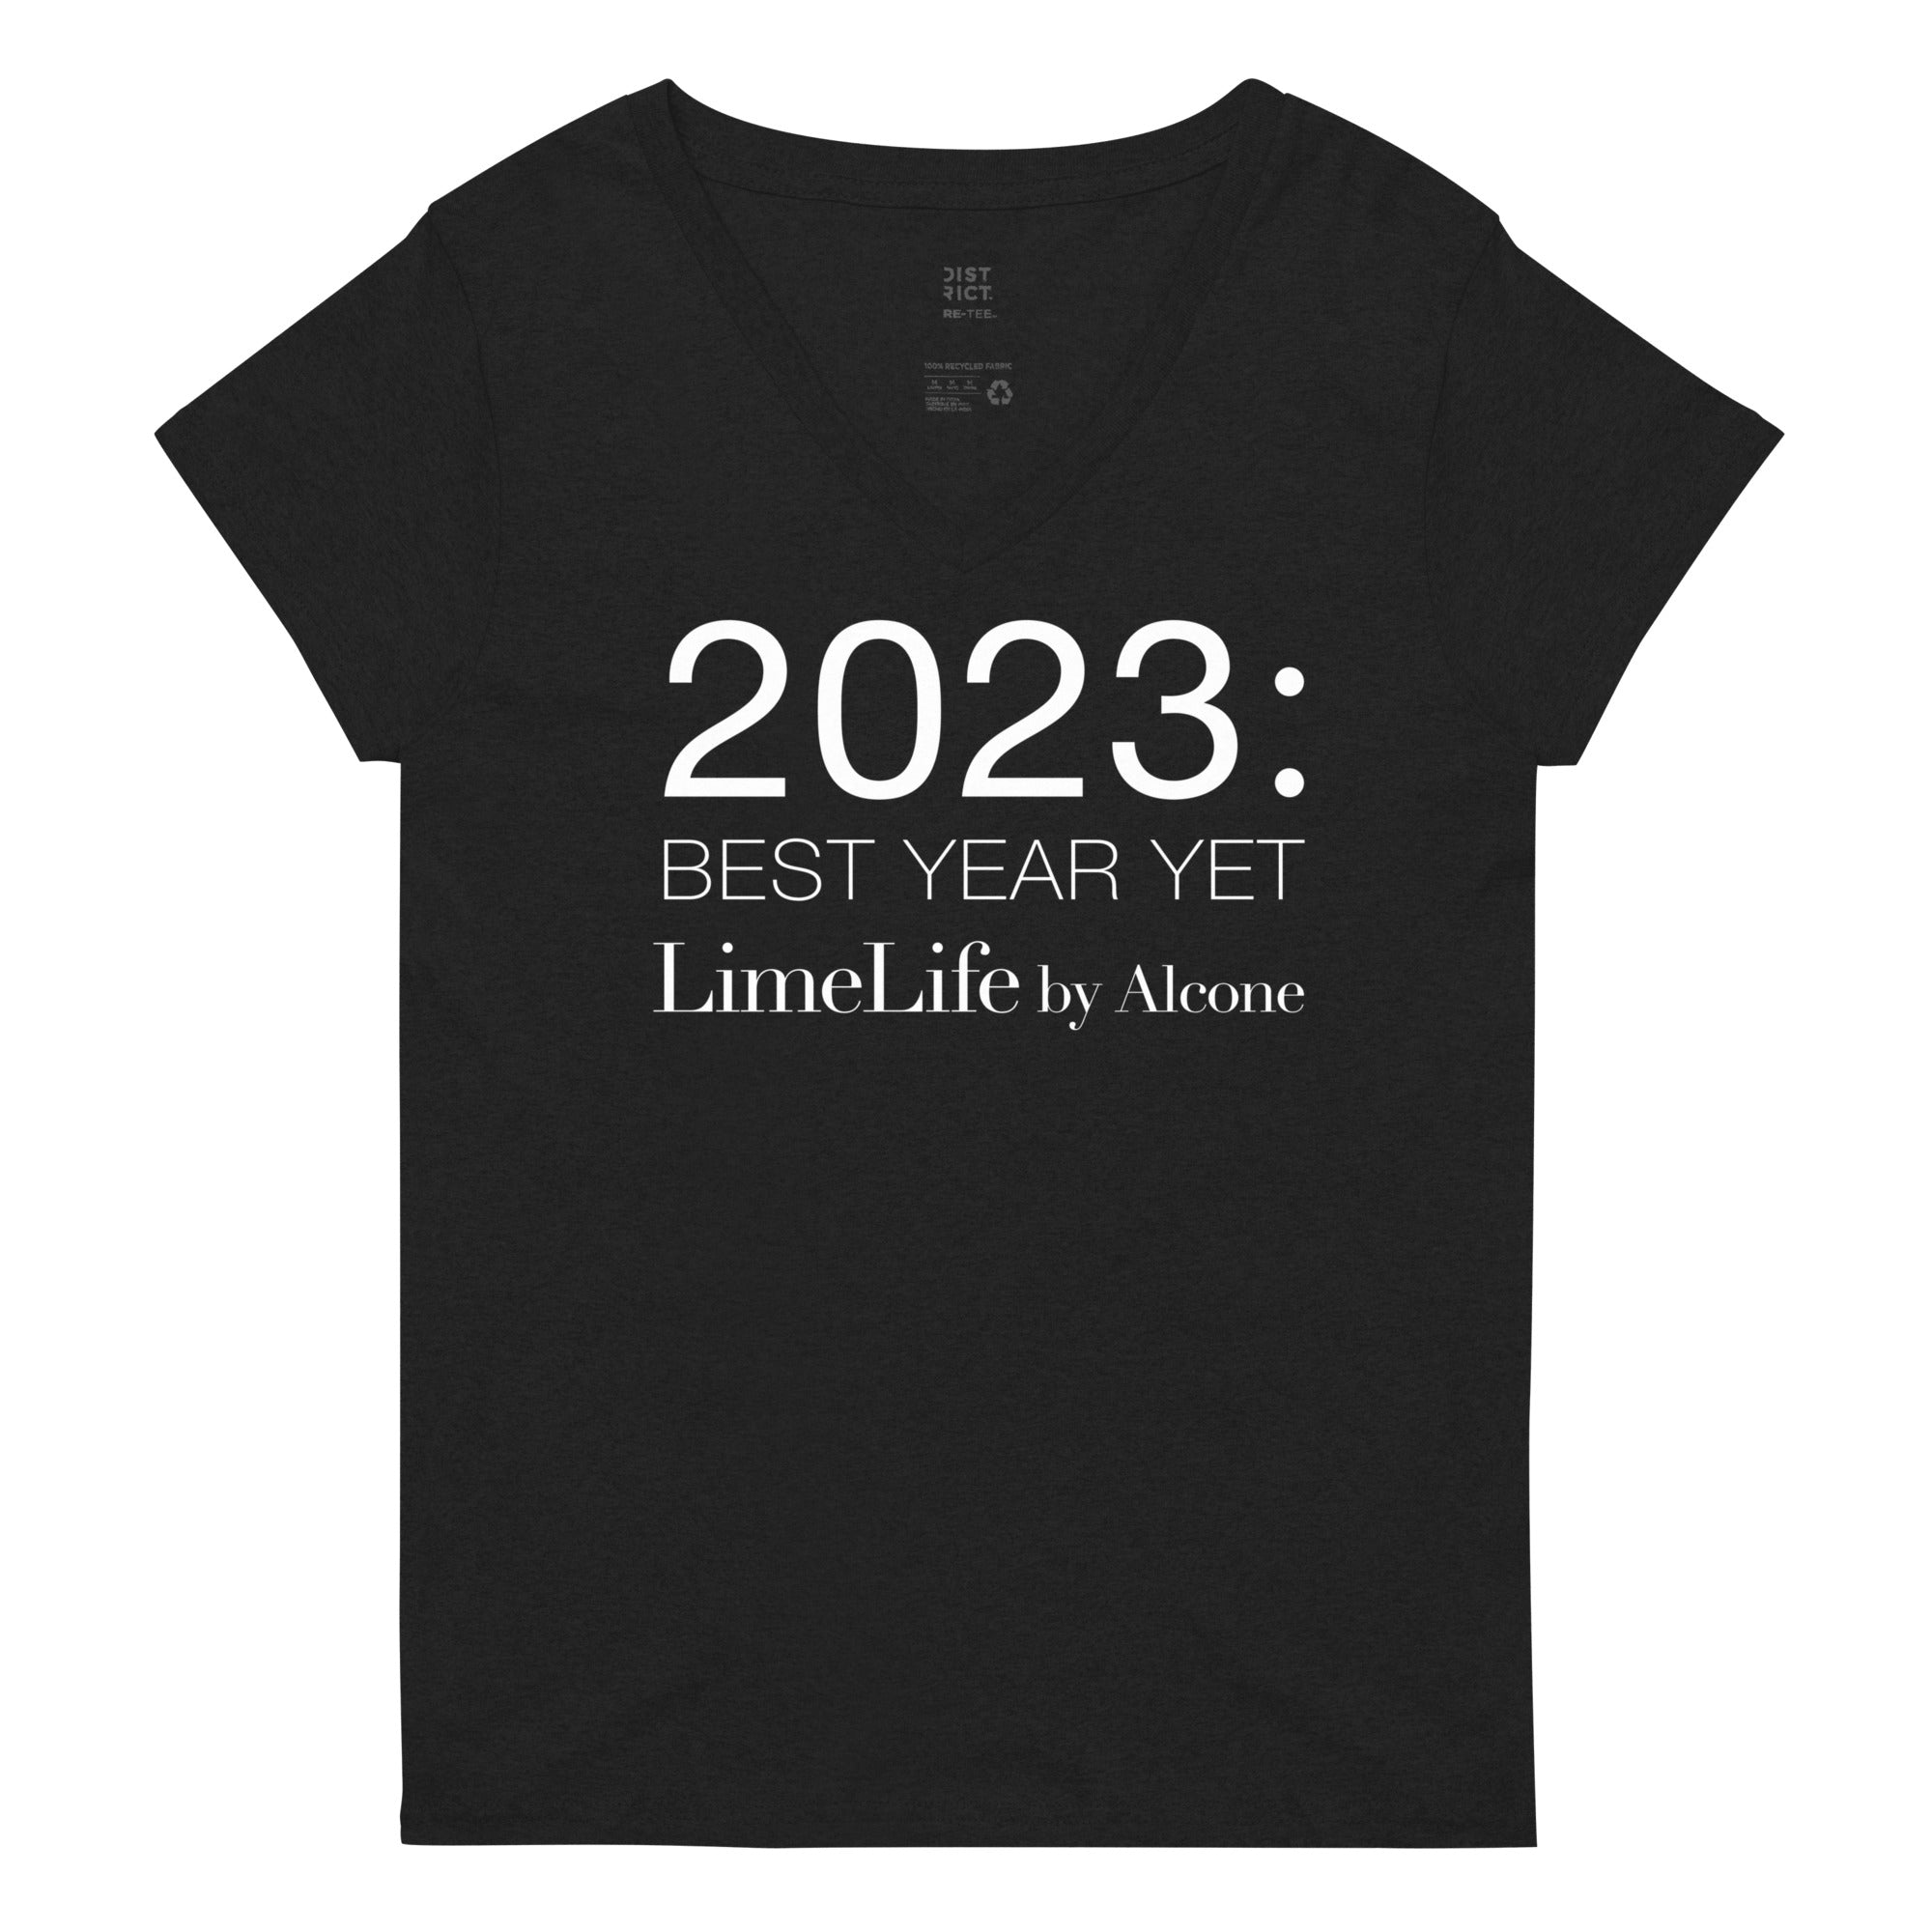 2023: Best Year Yet - Women’s recycled v-neck t-shirt